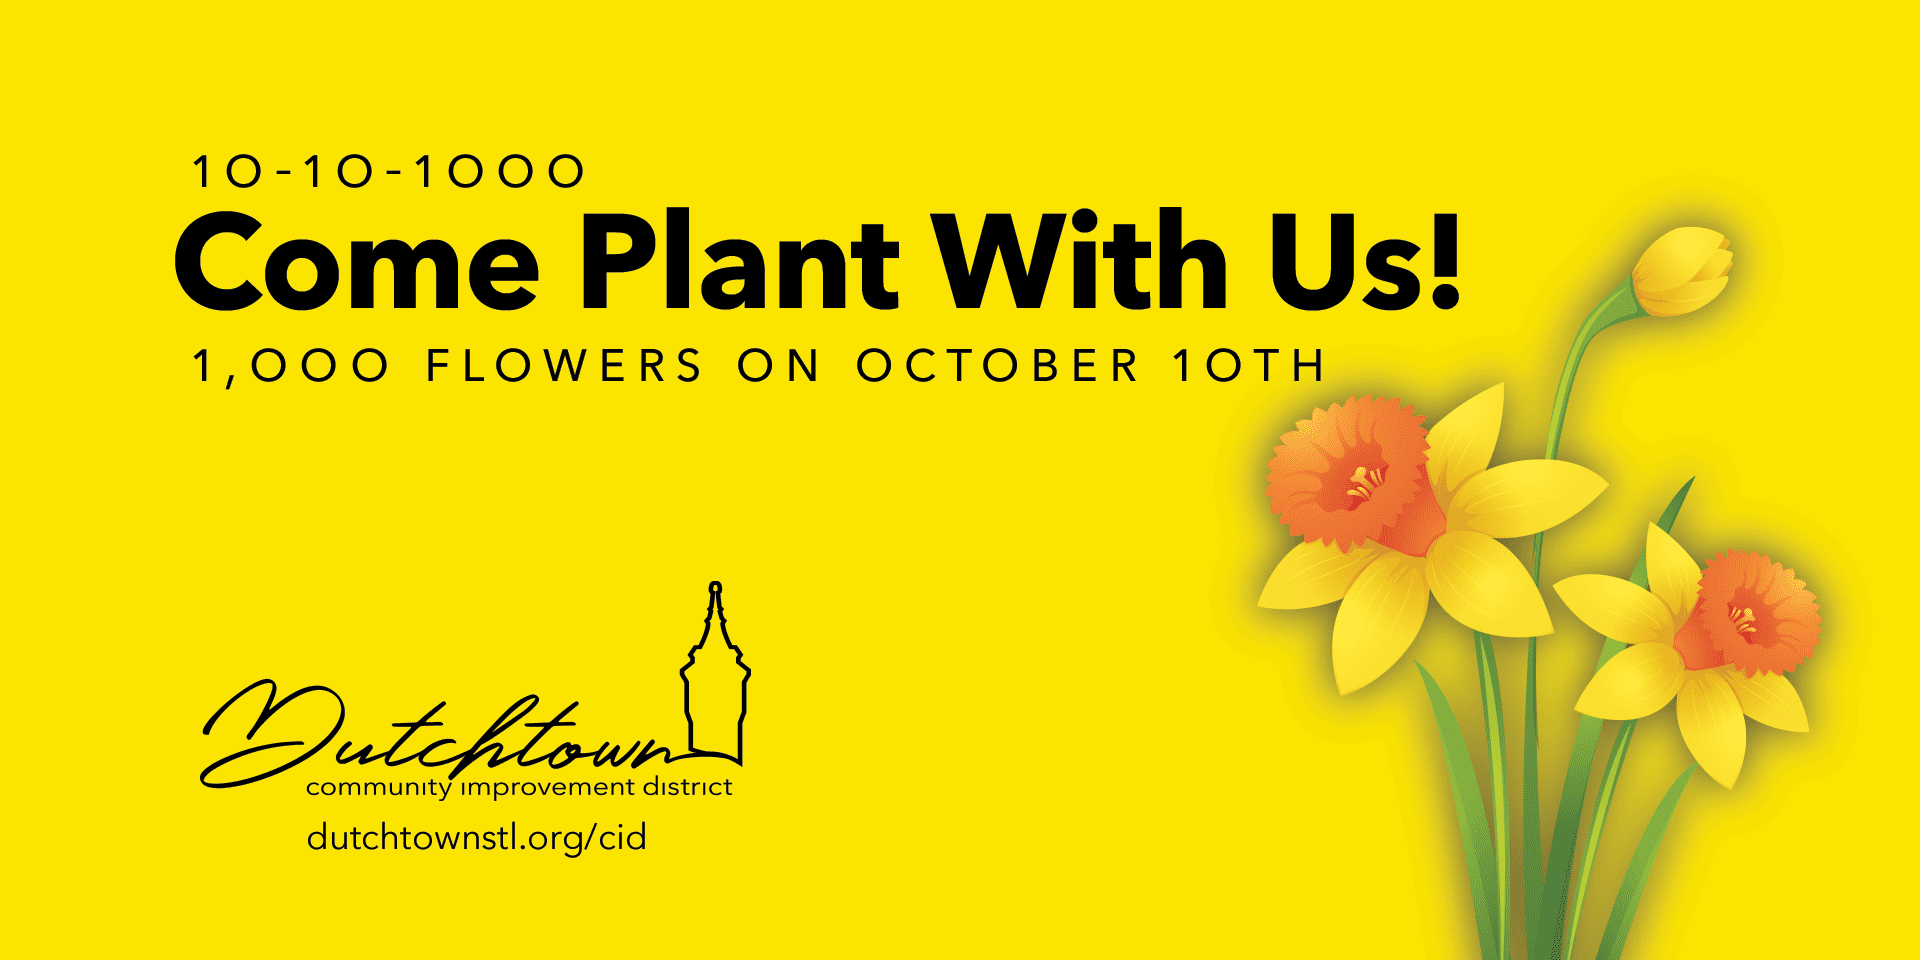 10-10-1000: Come Plant With Us!